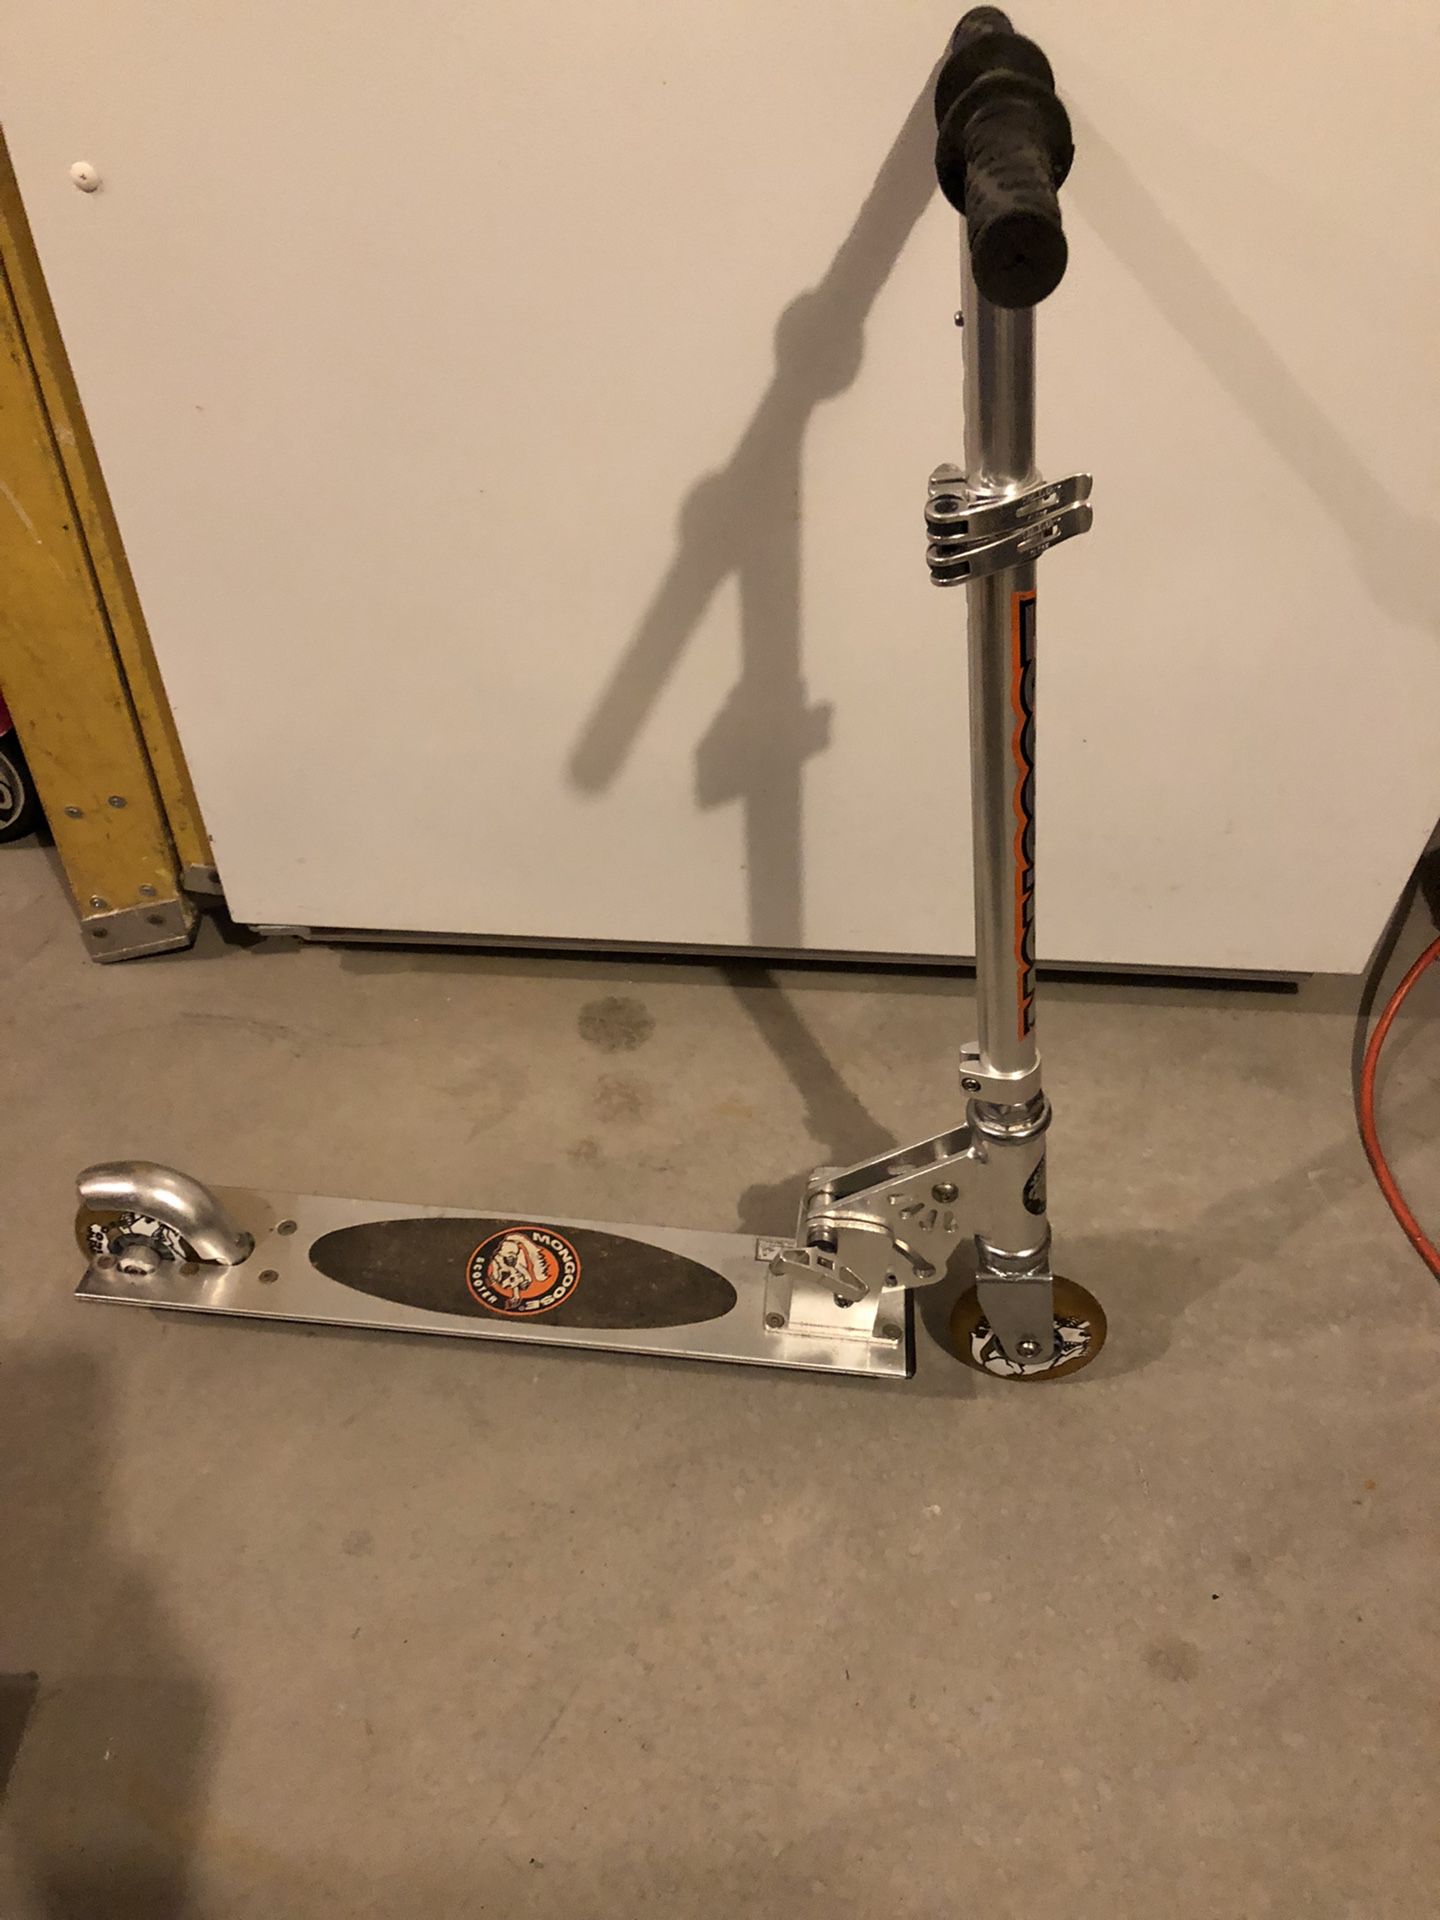 Mongoose scooter